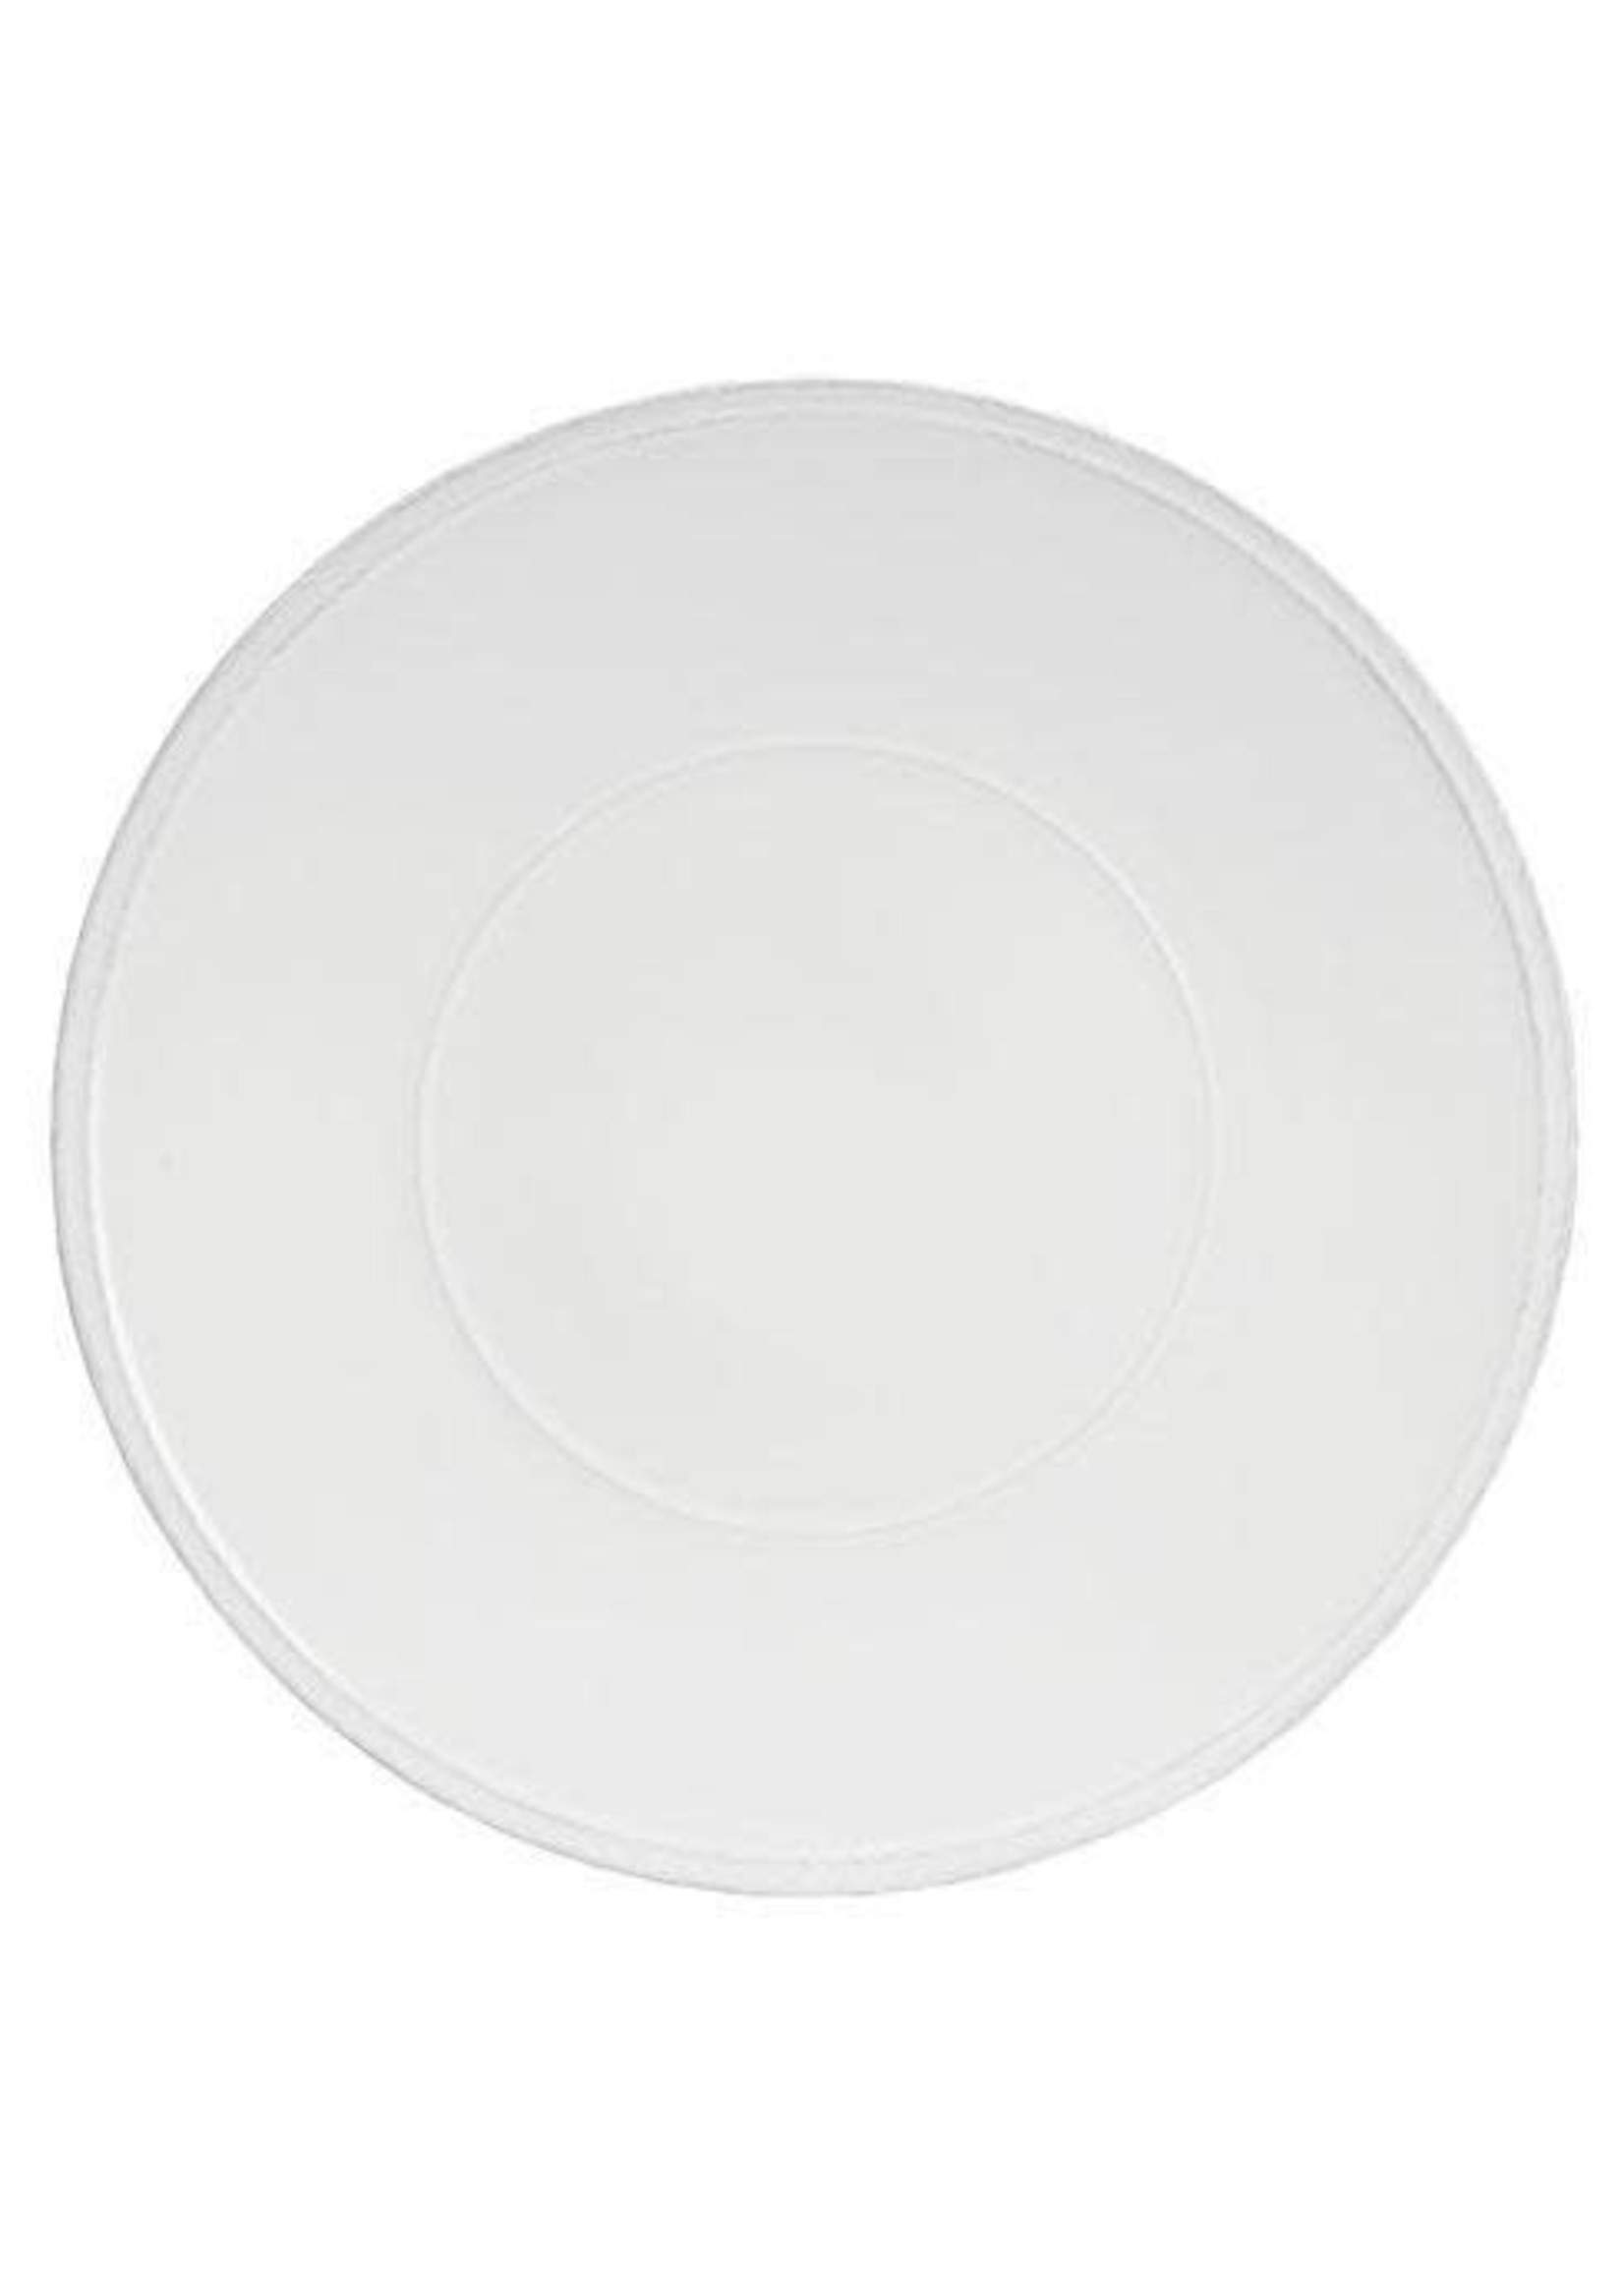 CASAFINA LIVING FRISO CHARGER PLATE 14"-WHITE